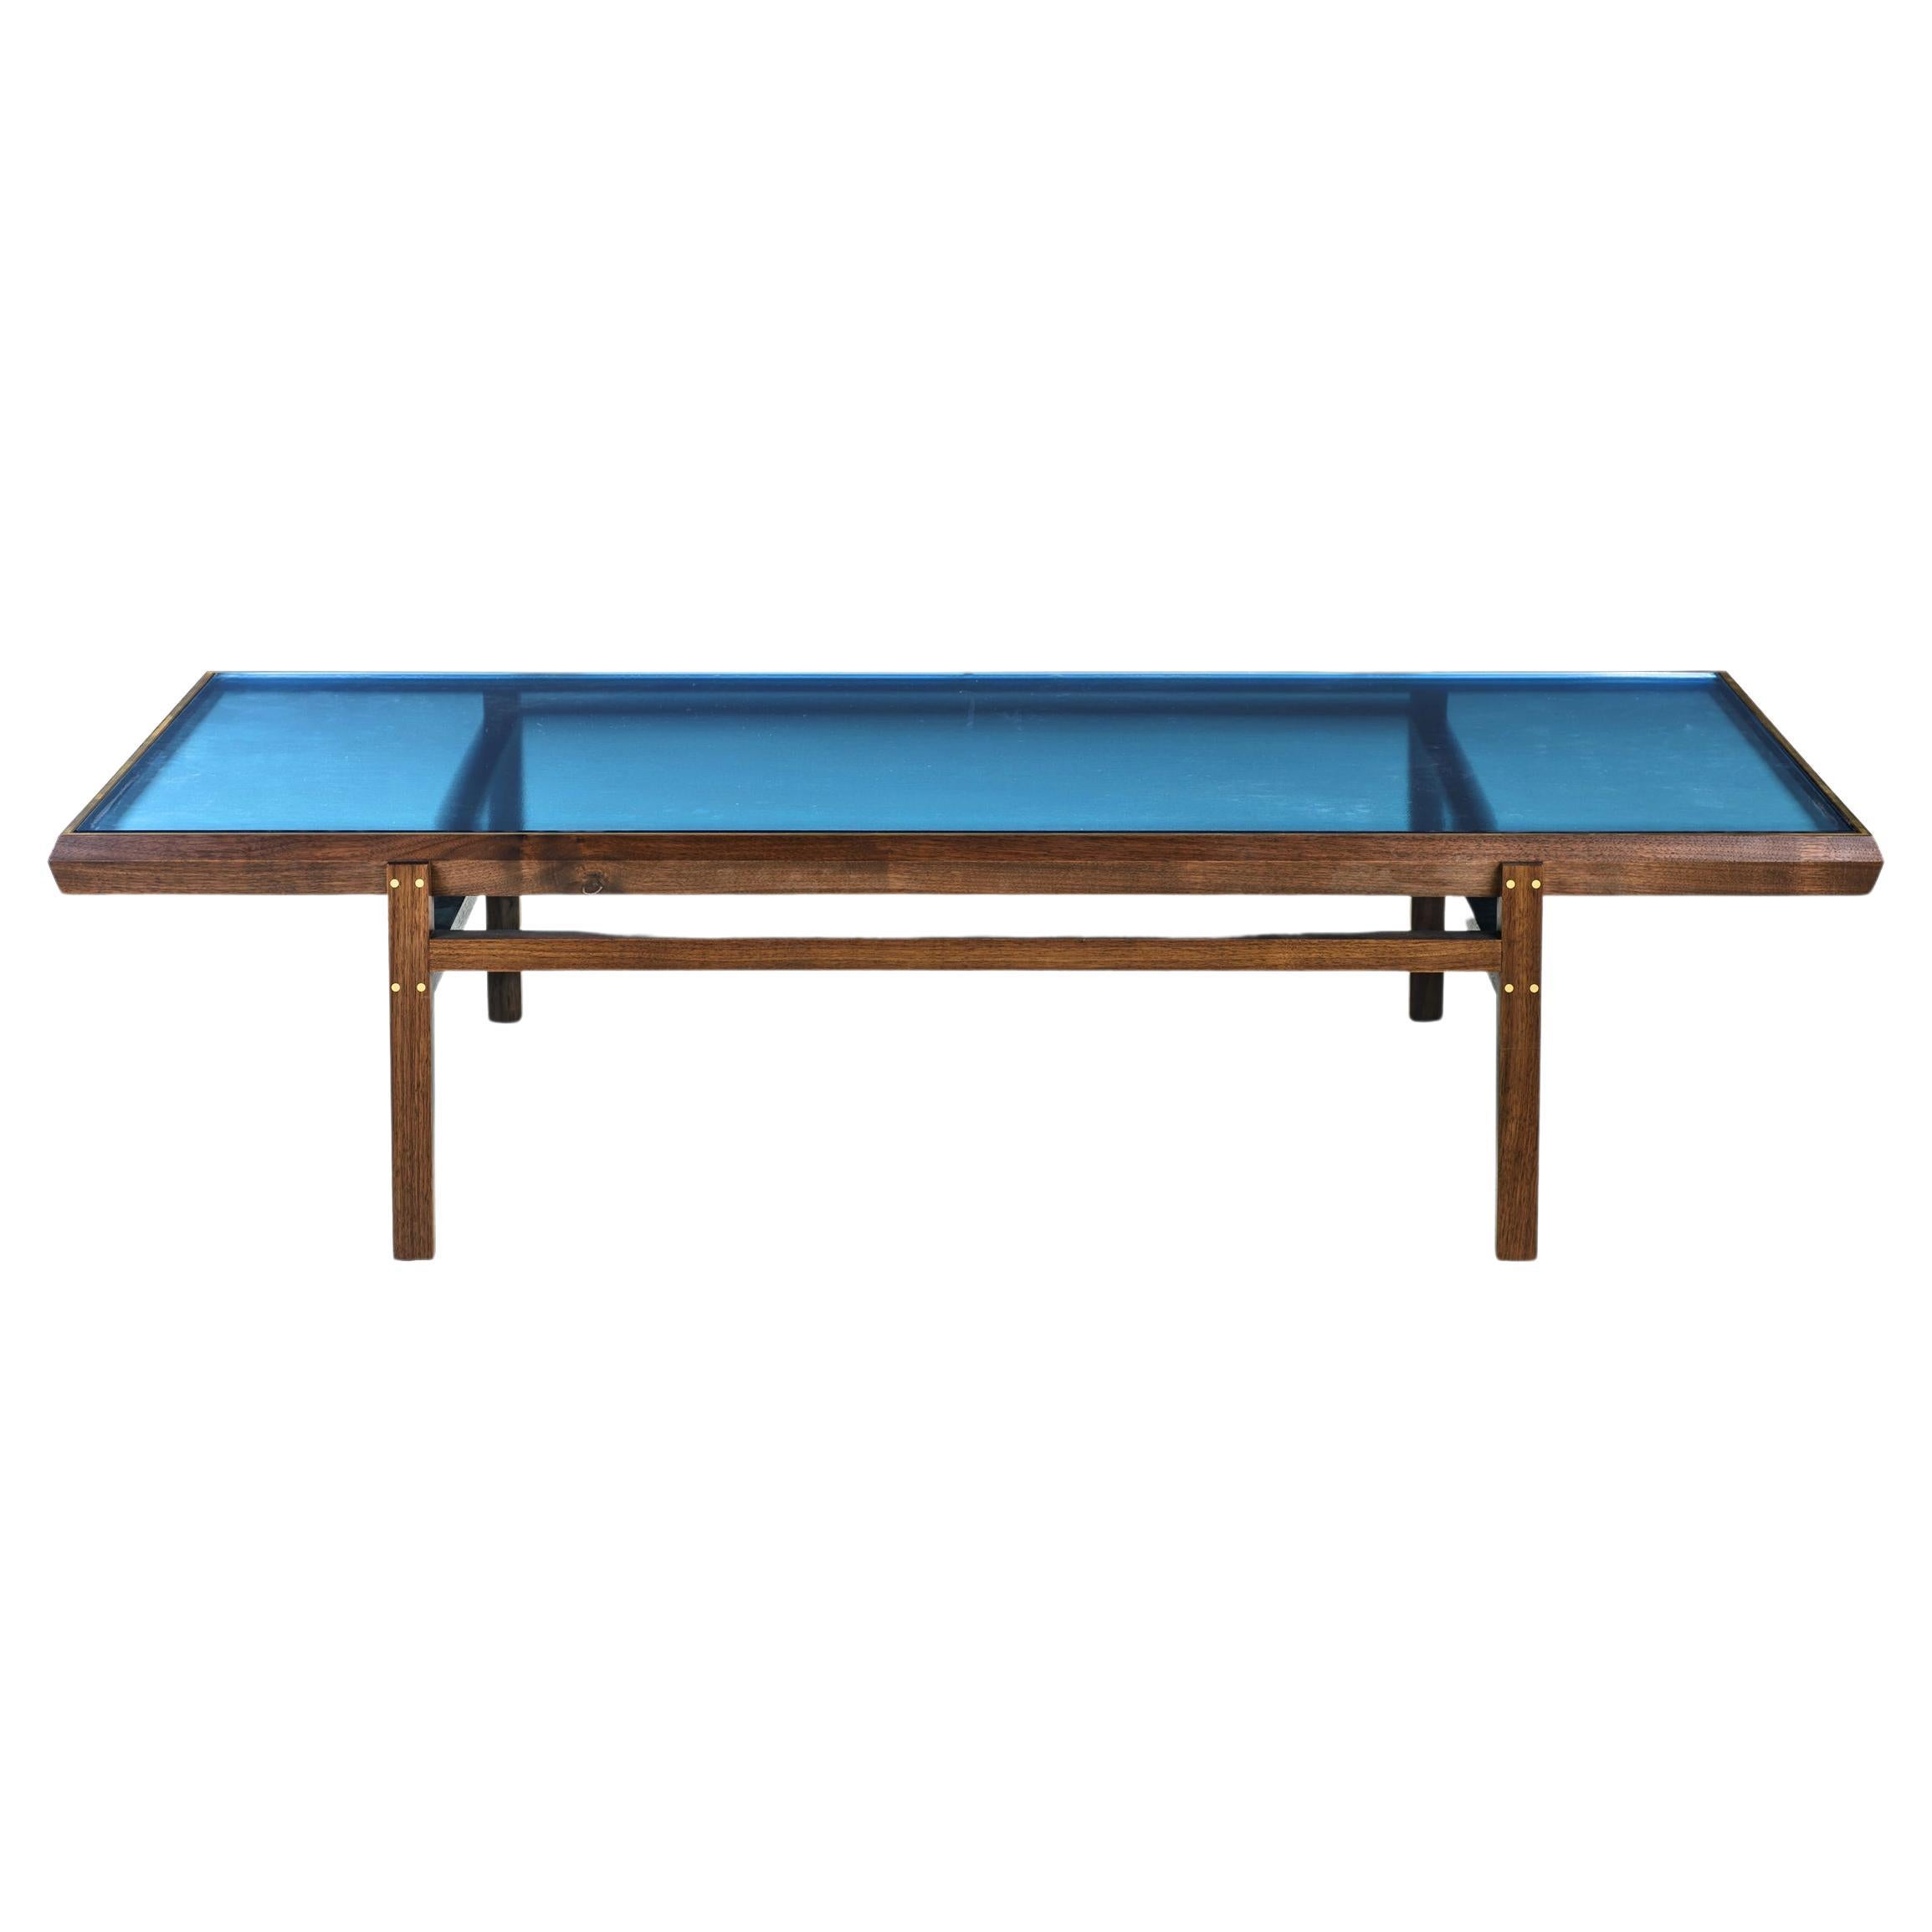 KGBL Pintor Coffee Table